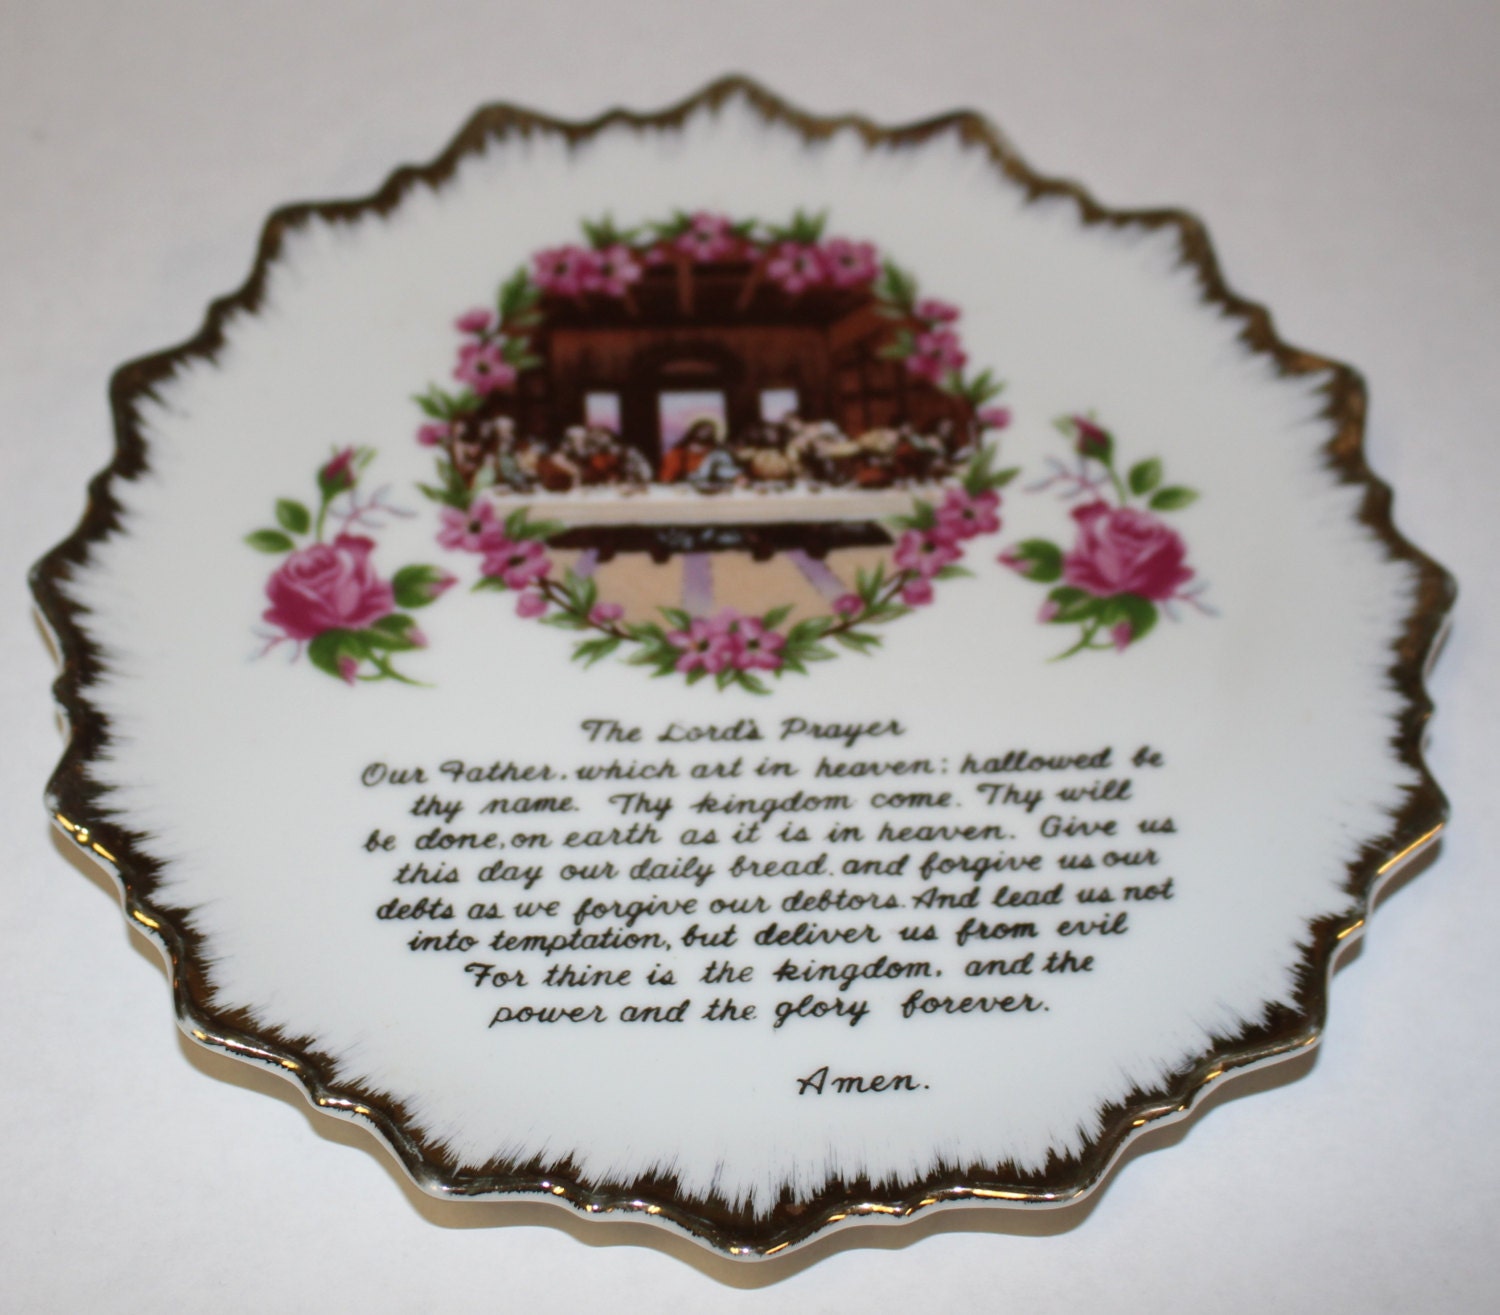 Vintage Lord's Prayer Plate with pink roses and Last